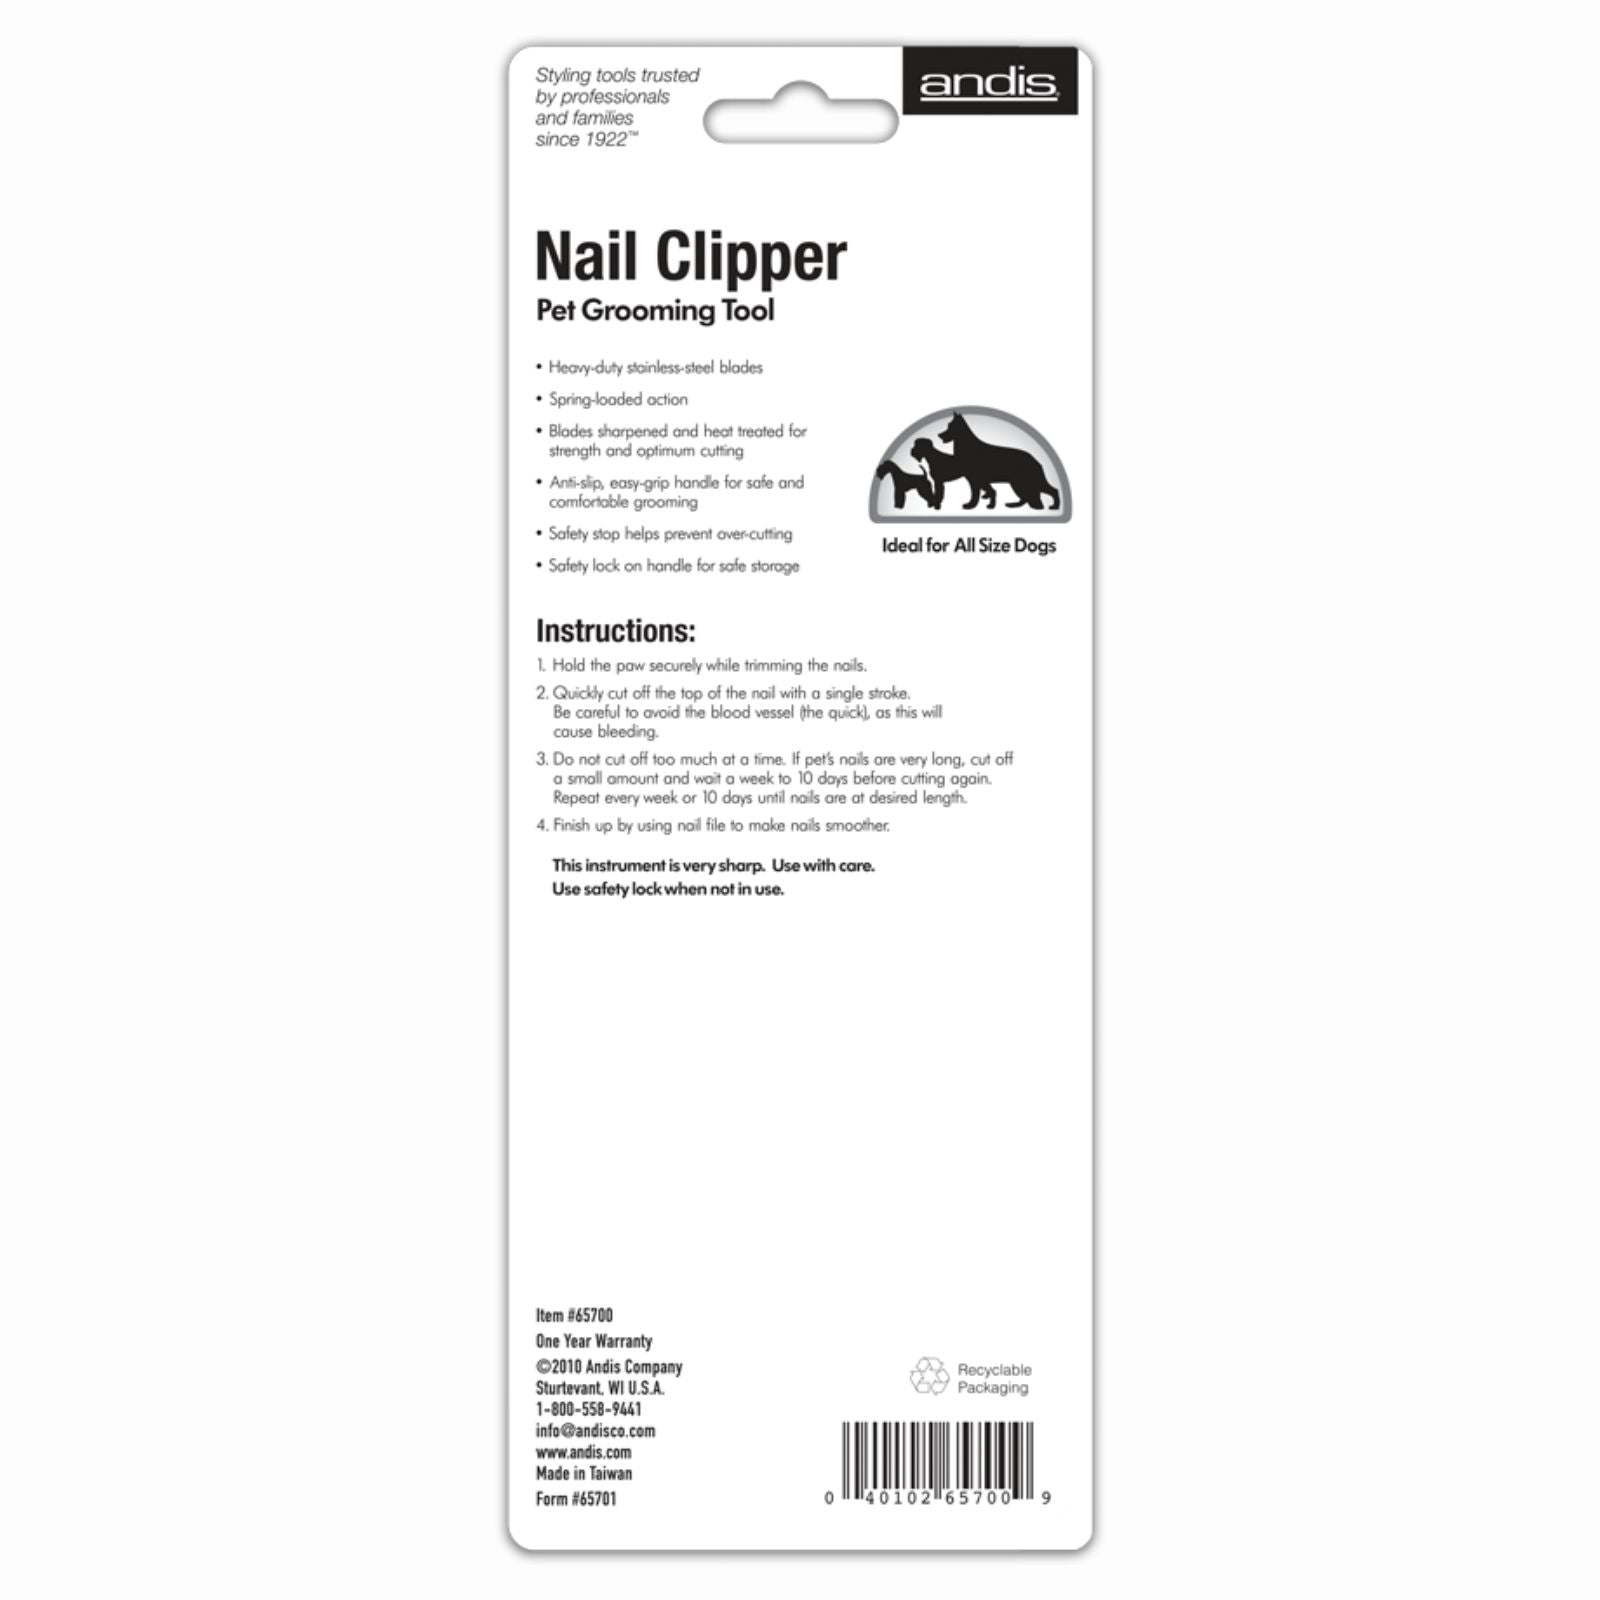 Nail Clippers - Ideal for All Sized Dogs